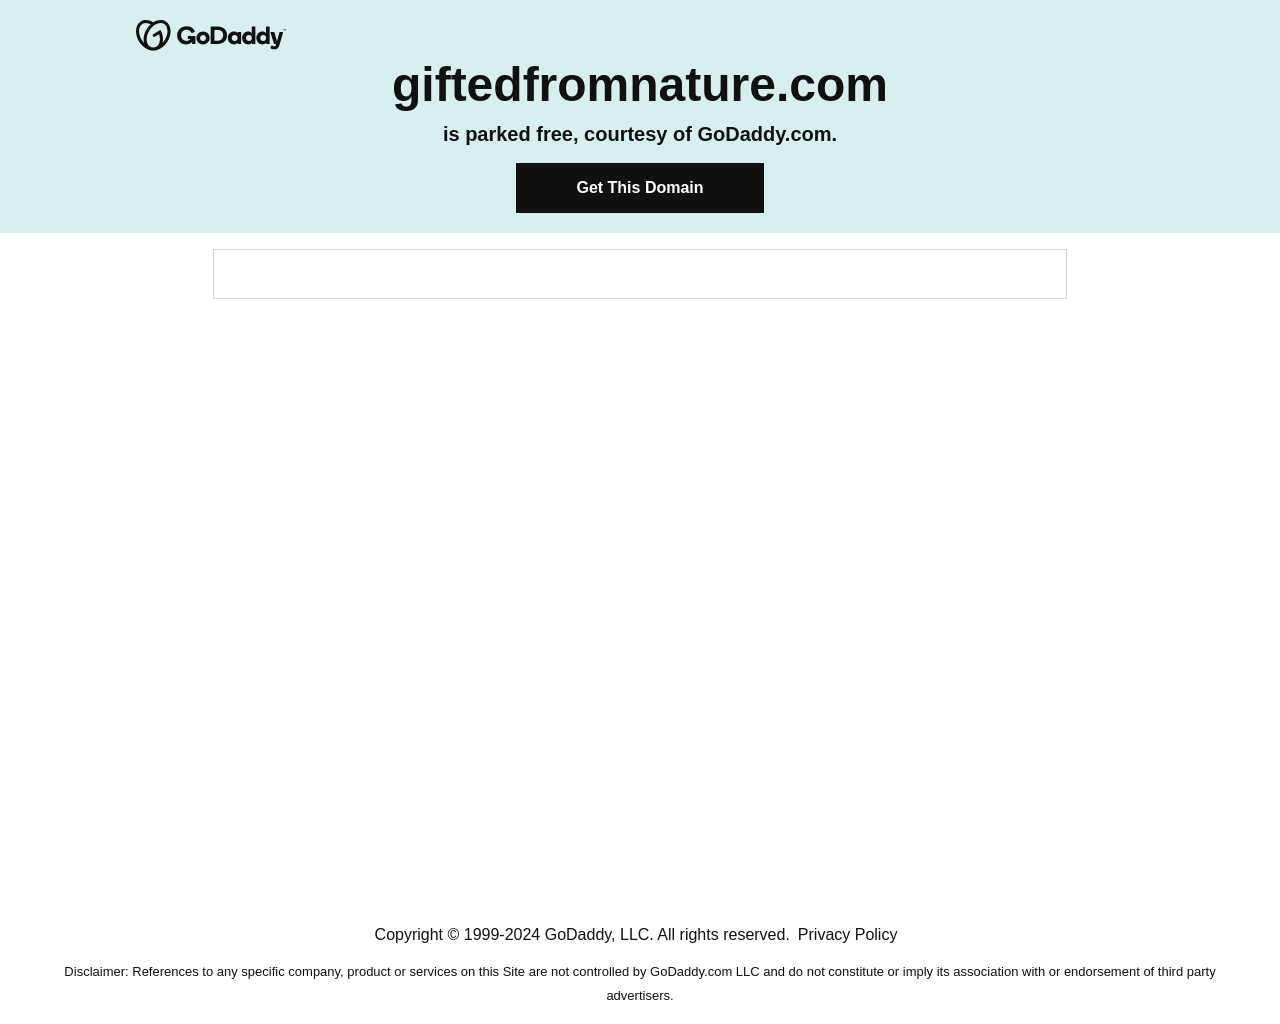 giftedfromnature.com